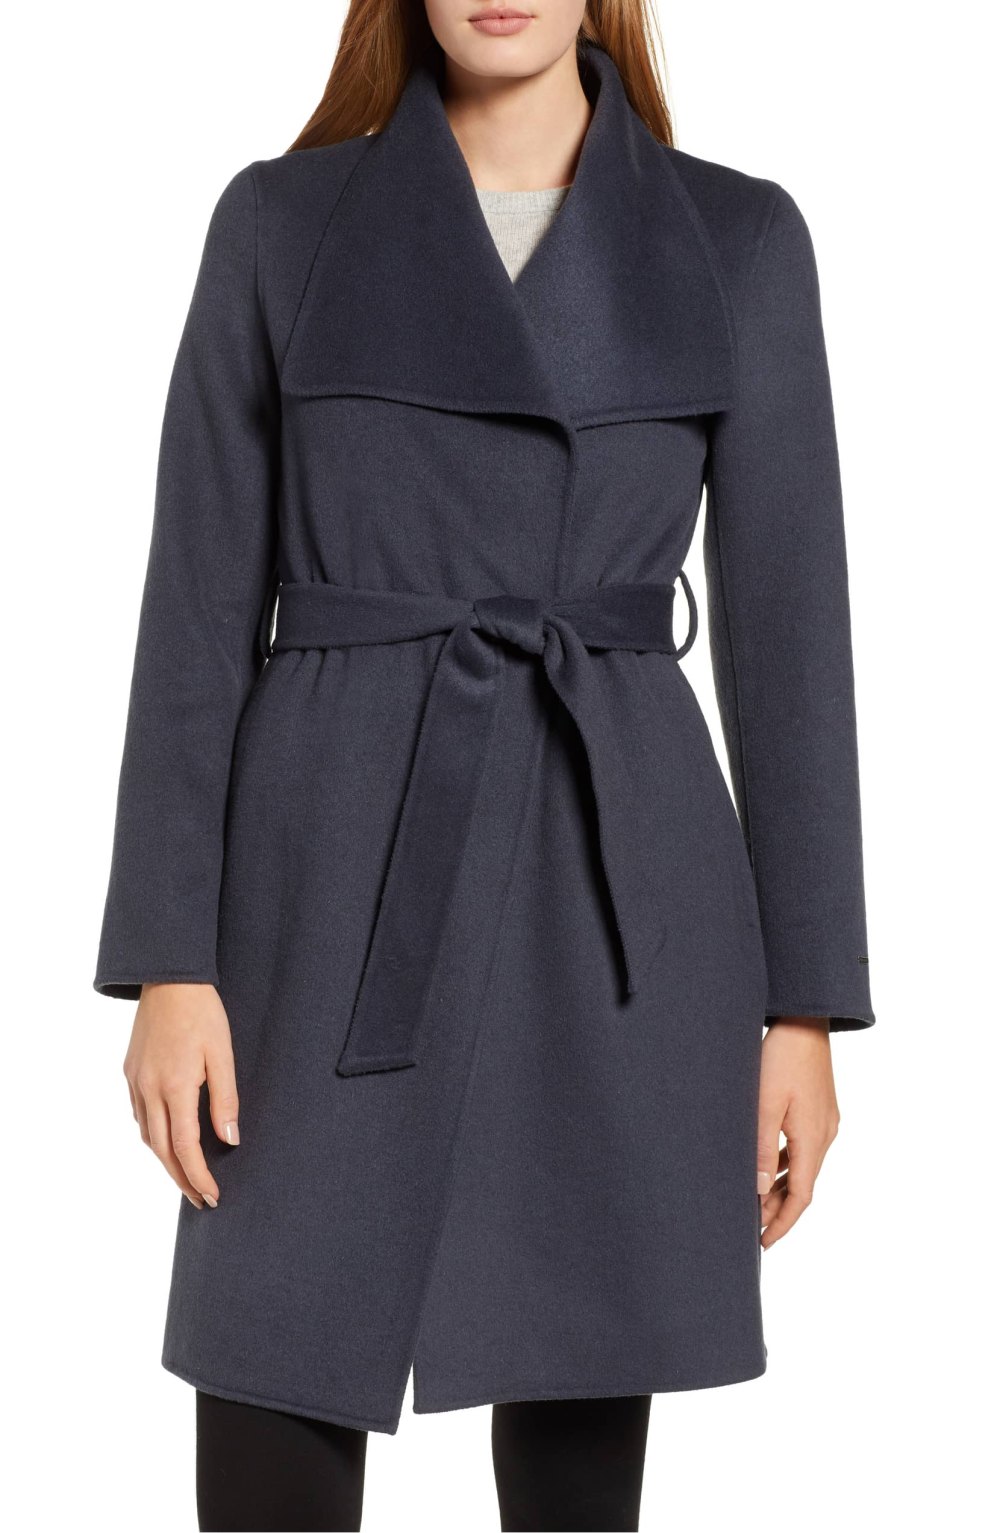 This Wrap Coat Is Comfy, Chic & Fresh on the Nordstrom Sale Rack | Us ...